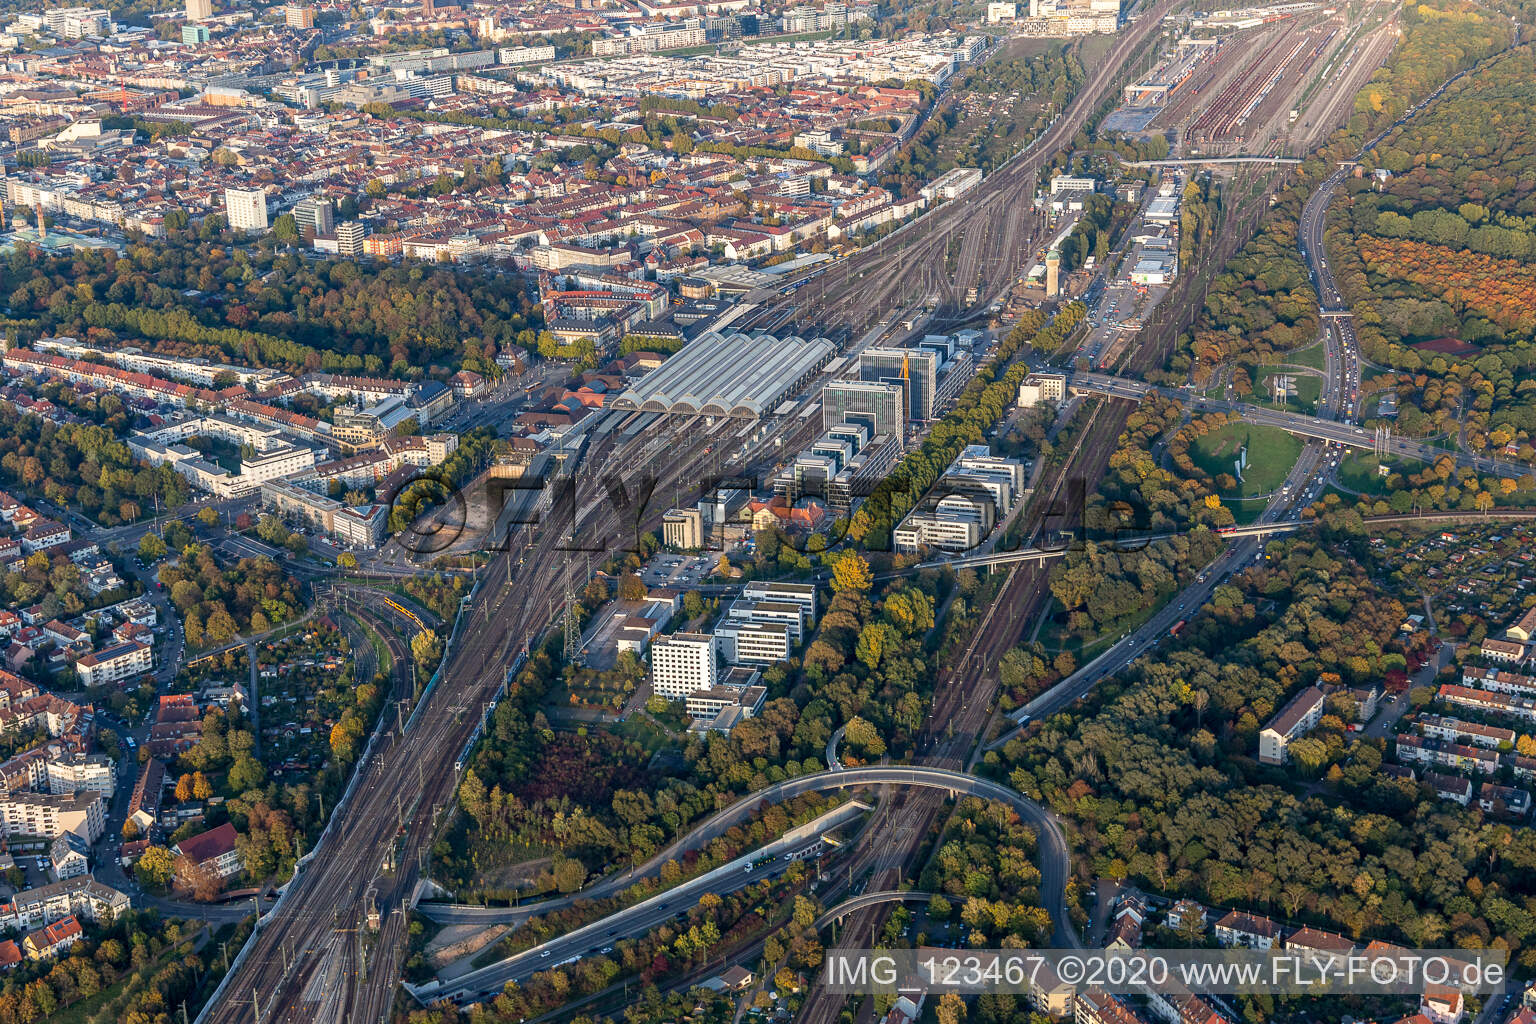 Track progress and building of the main station of the railway in the district Suedweststadt in Karlsruhe in the state Baden-Wurttemberg, Germany